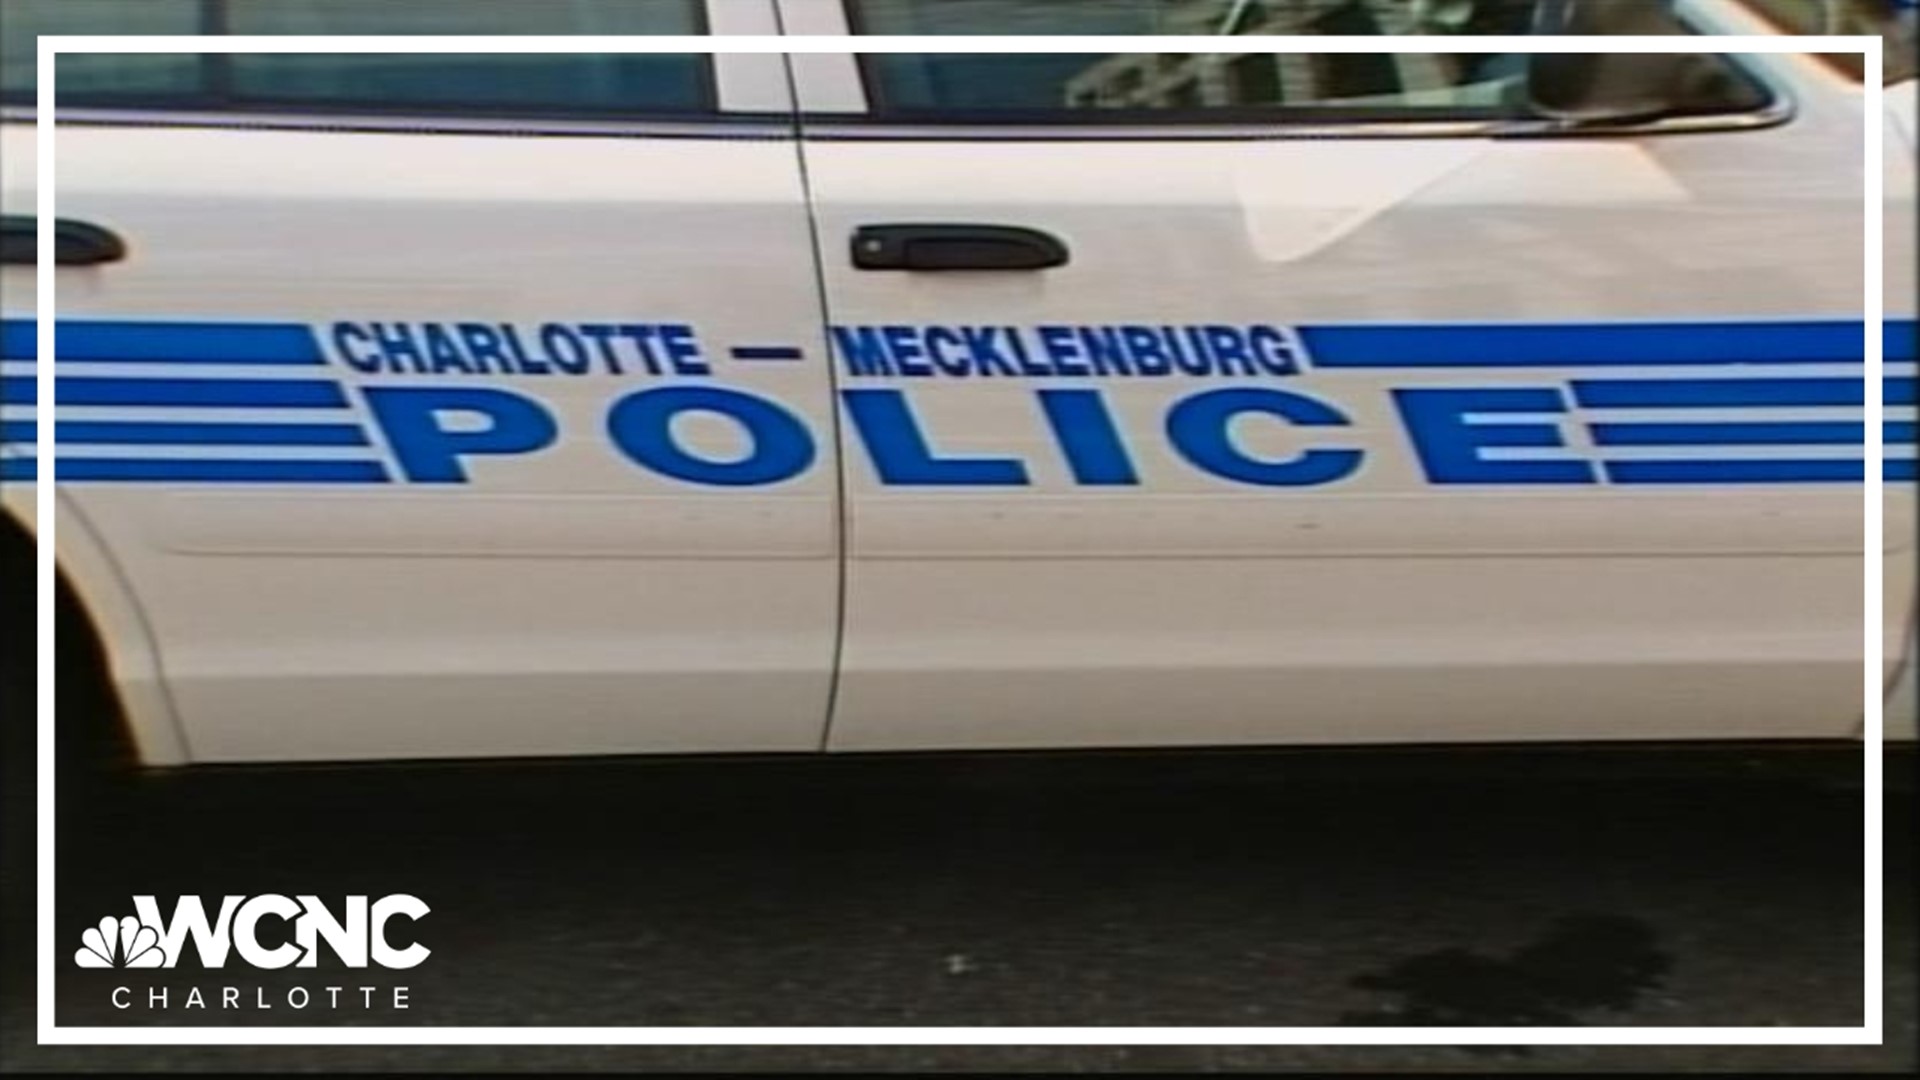 ​The suspect followed a woman into a restroom at the grocery store and began to assault her, investigators told WCNC Charlotte.